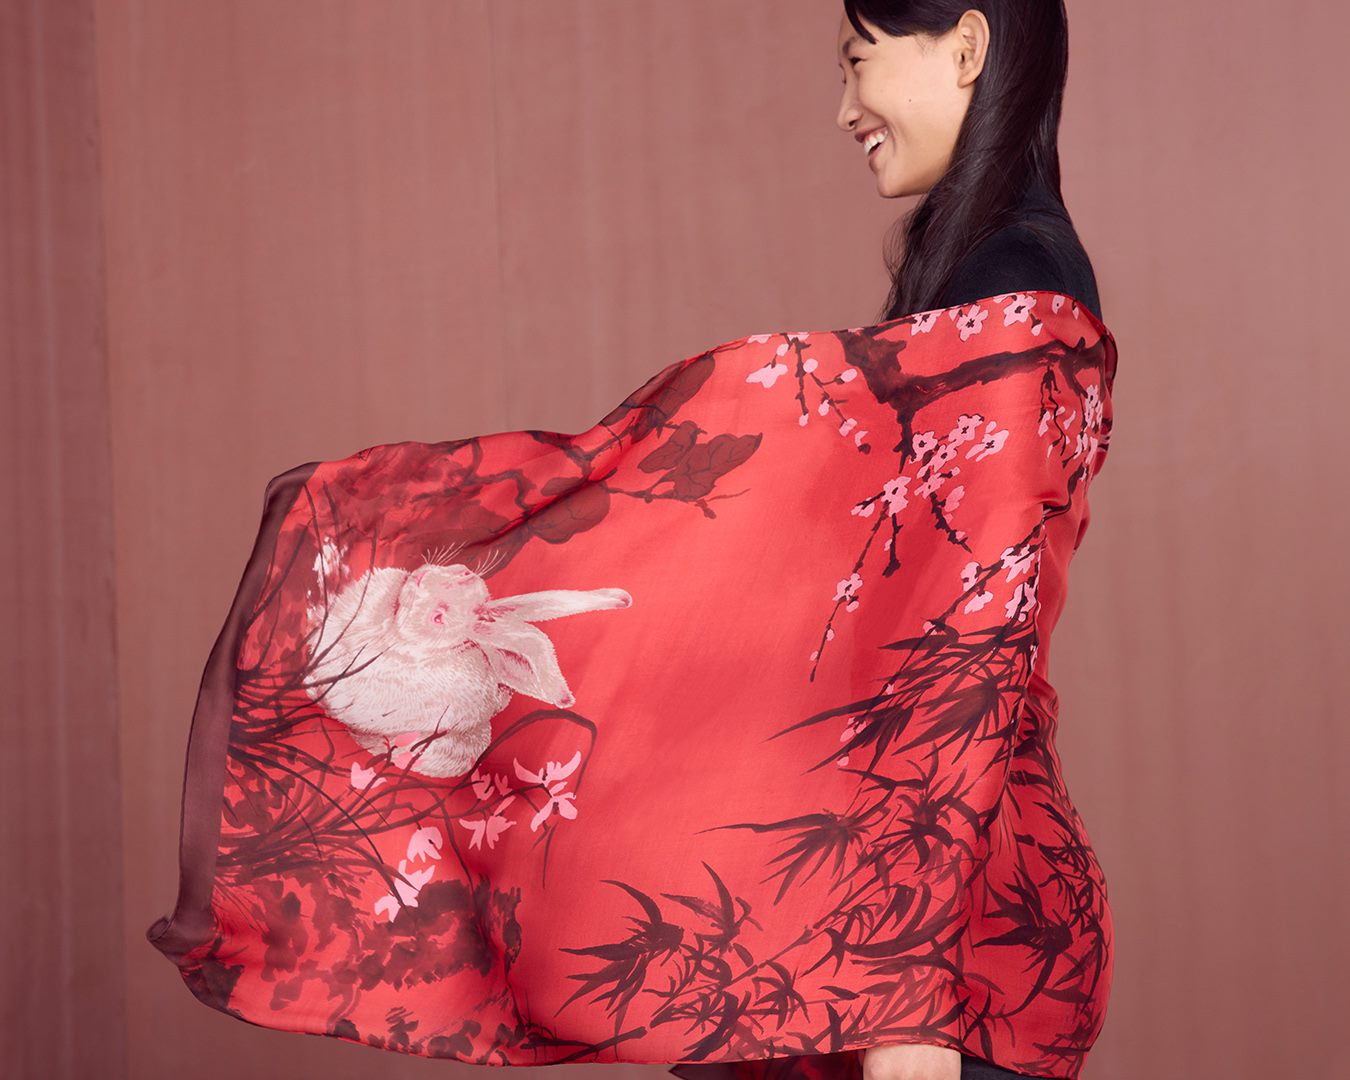 Profile image of a model holding out a large, red Ferragamo silk scarf featuring cherry blossoms, trees and a bunny.